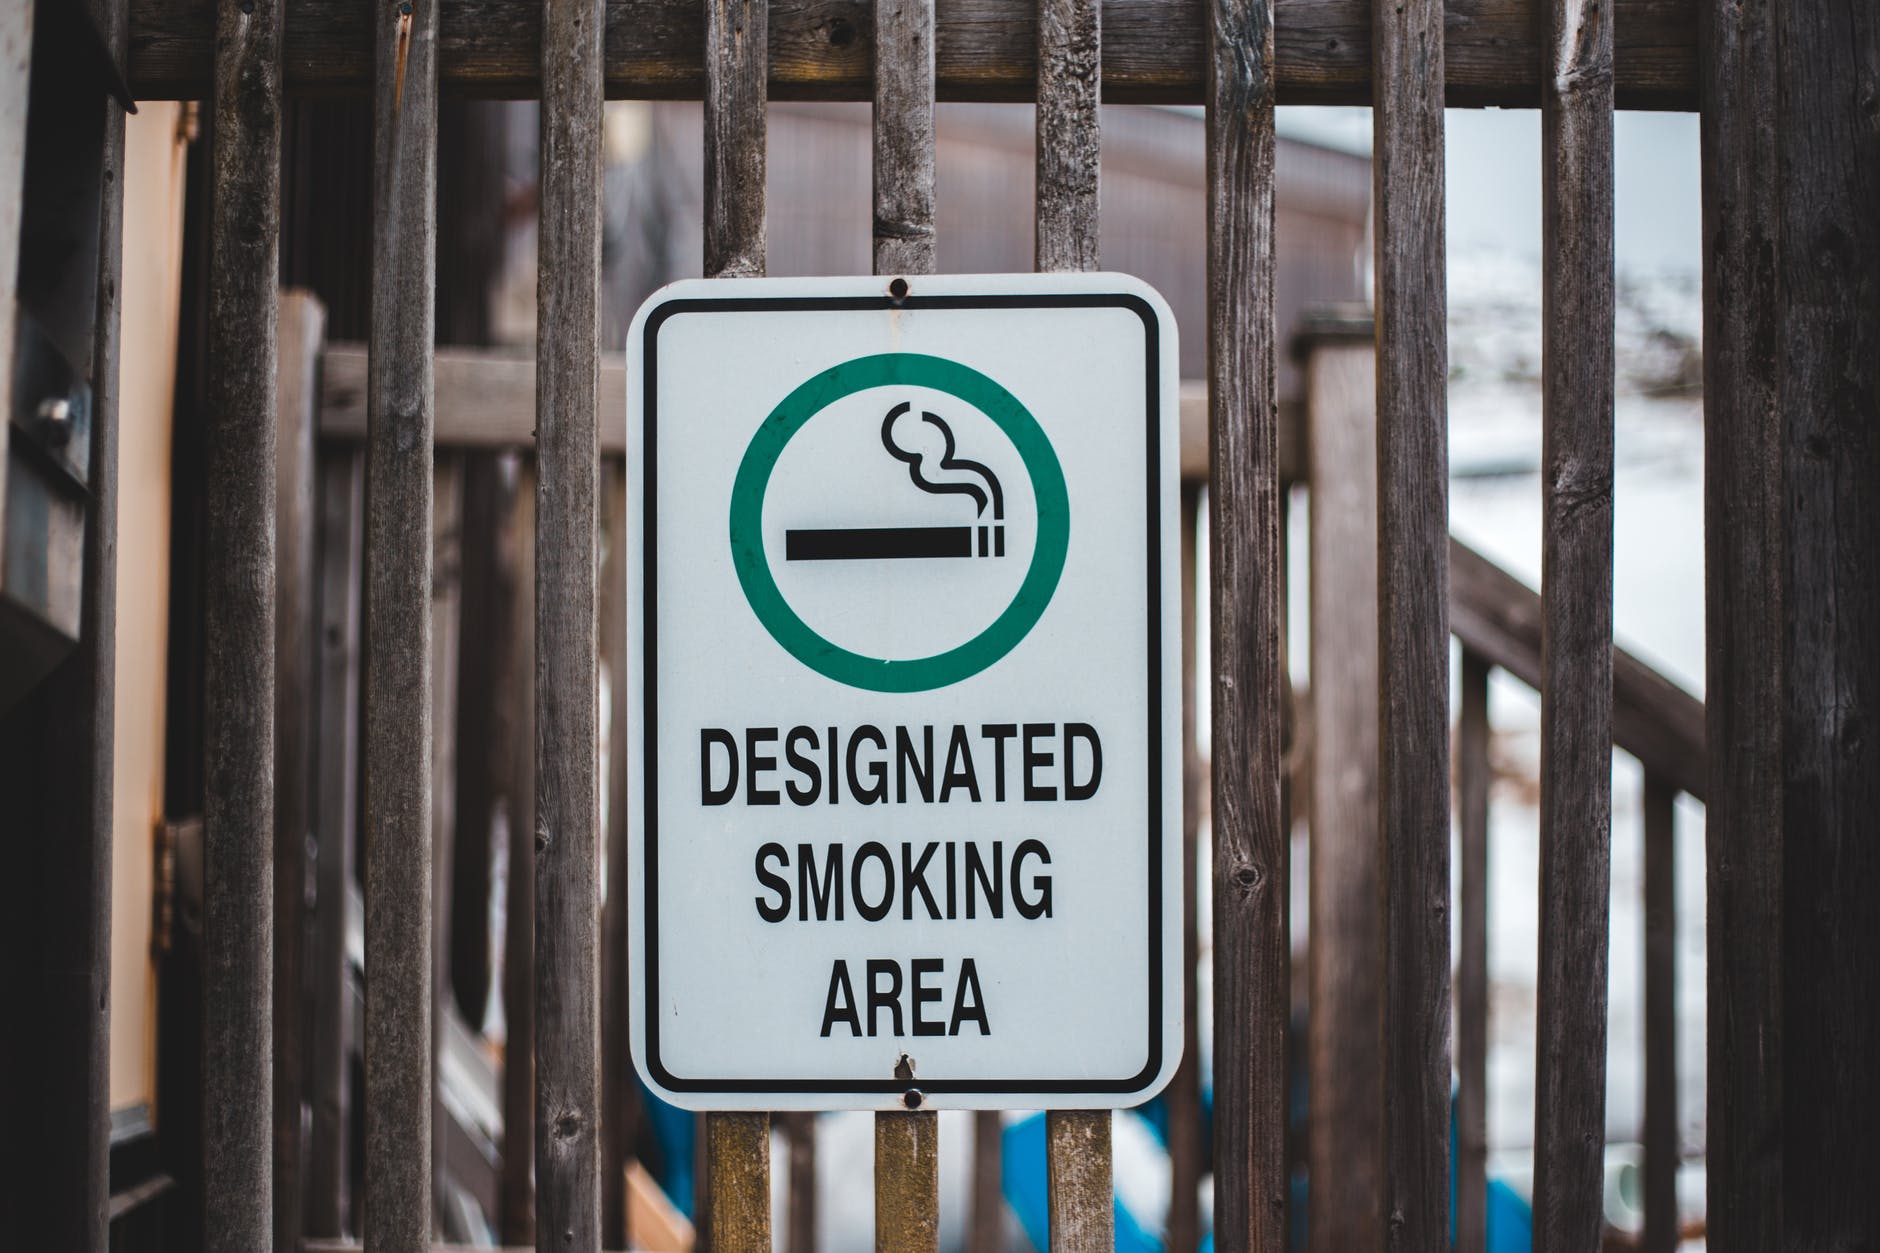 sign showing area for smoking on street